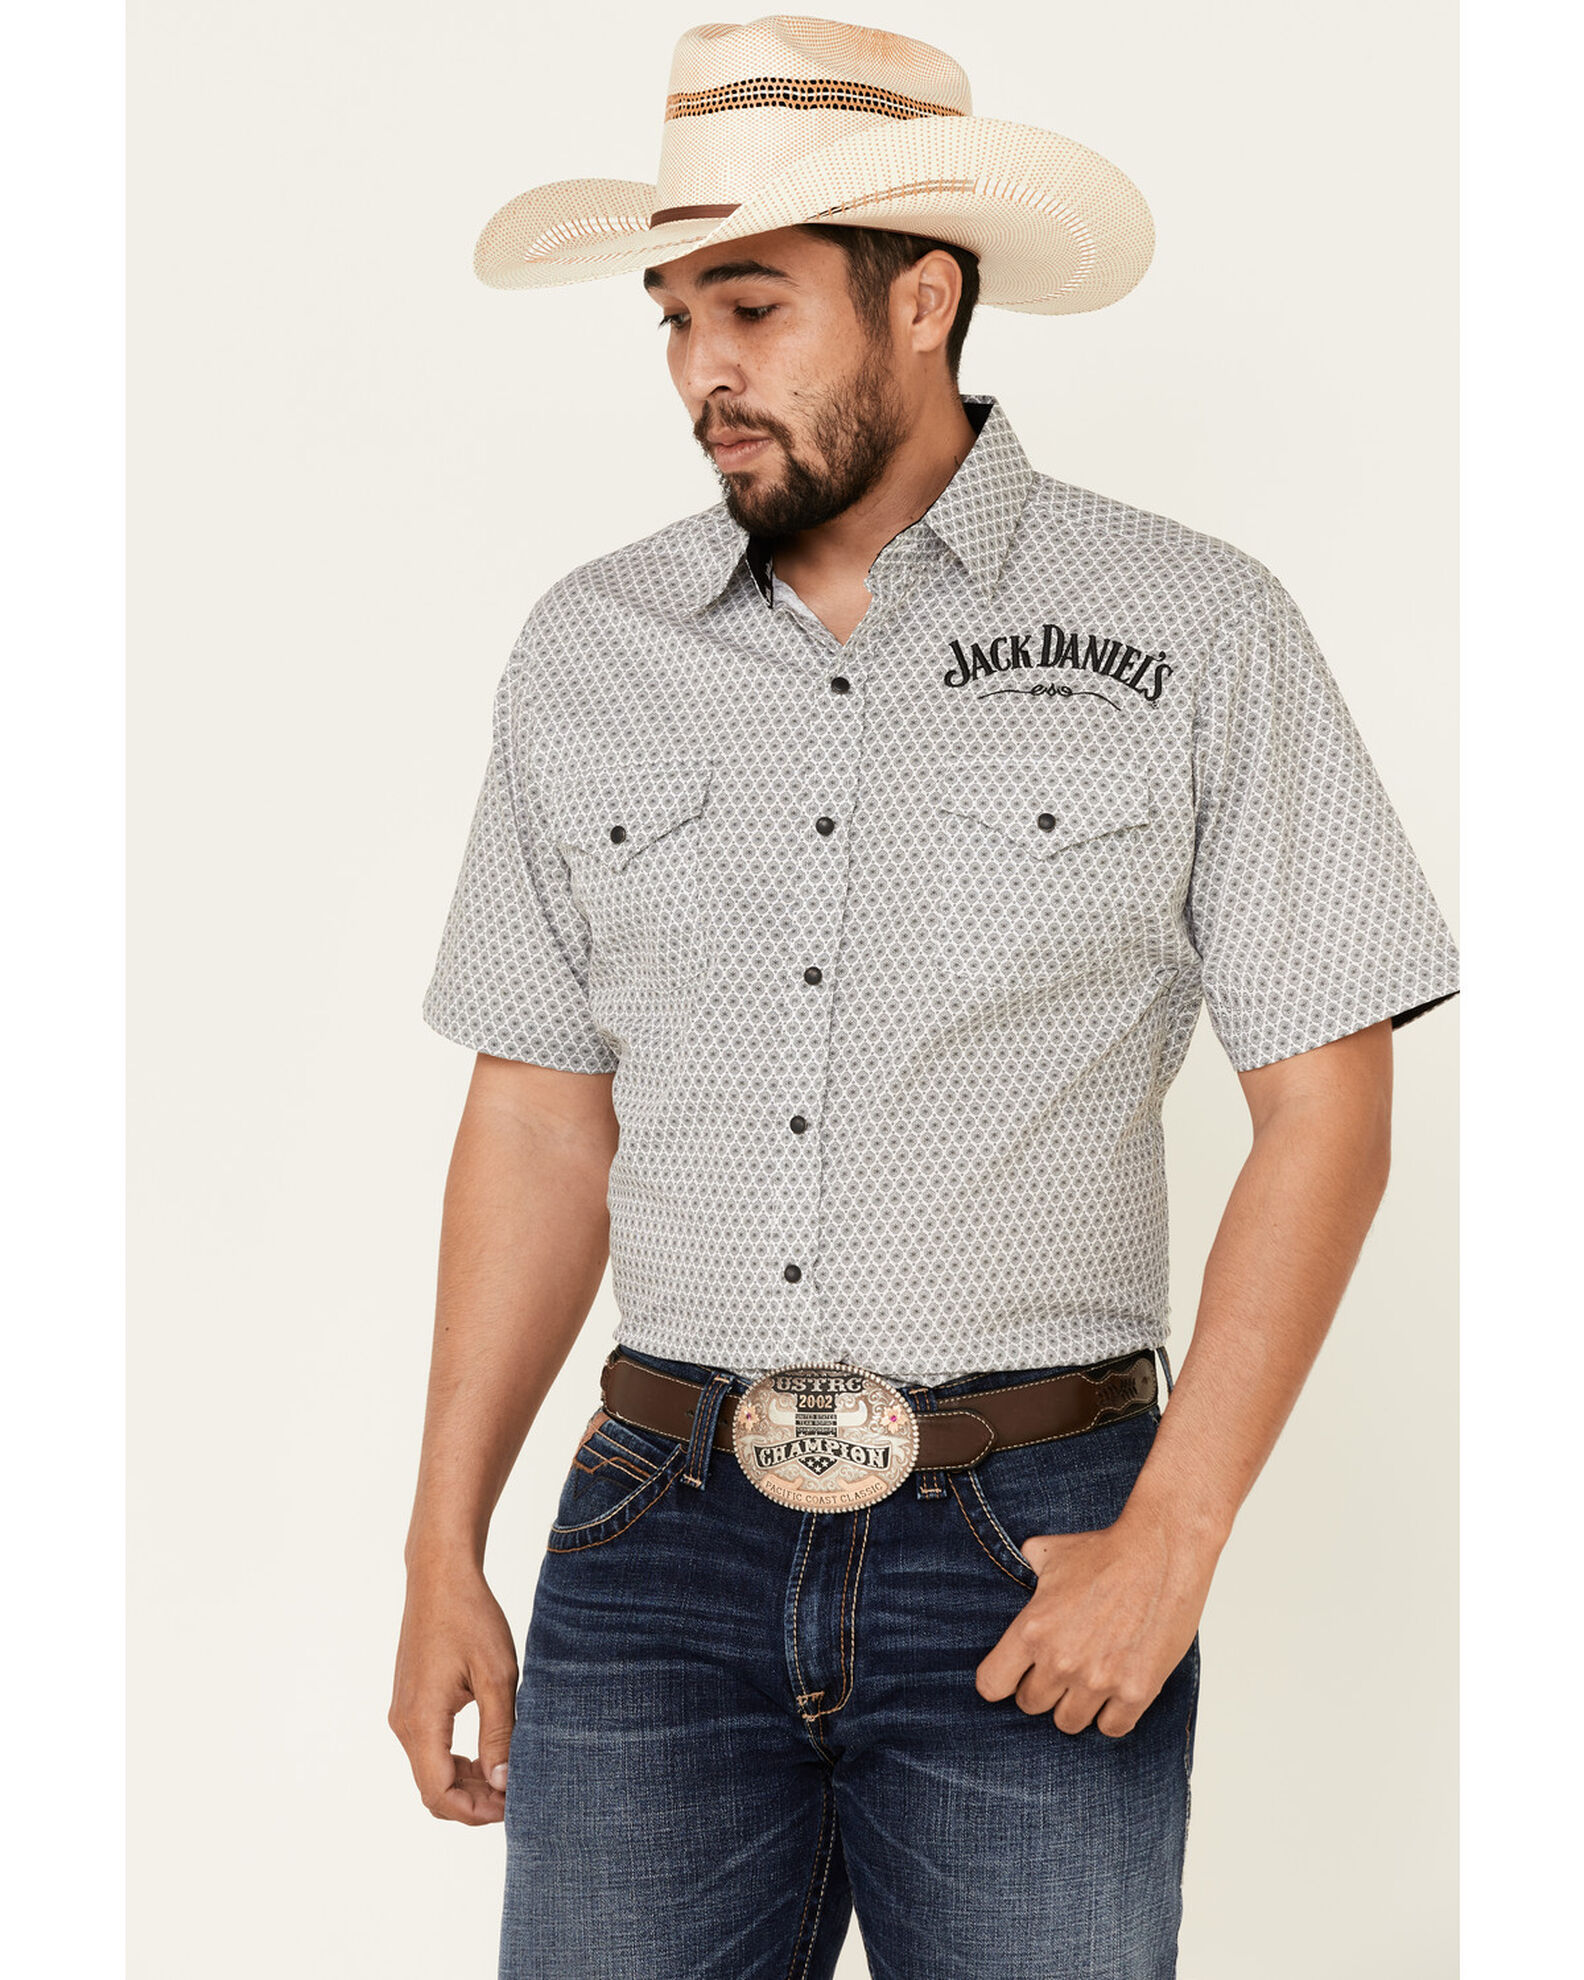 Jack Daniel's Men's Geo Print Short Sleeve Western Shirt - Country Outfitter